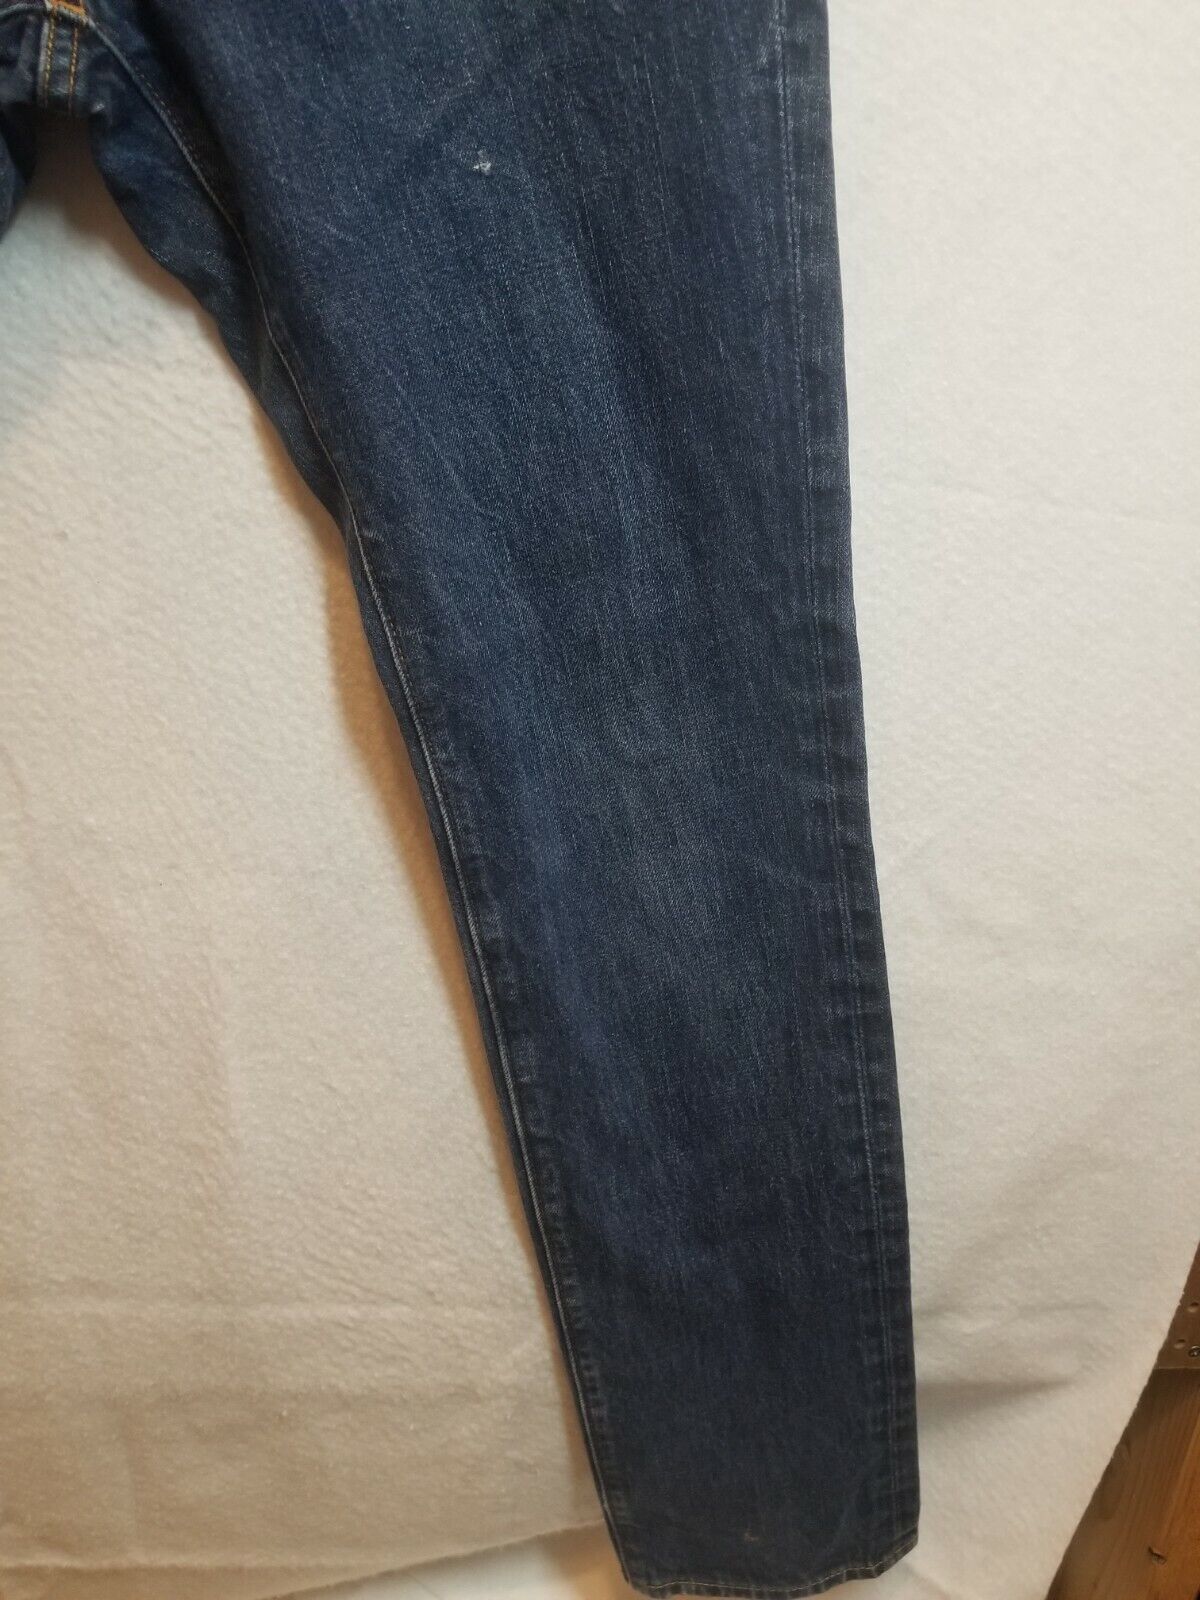 Abercrombie Fitch The A&F Slim Straight Mens Jeans Sz 28x30 Button Fly